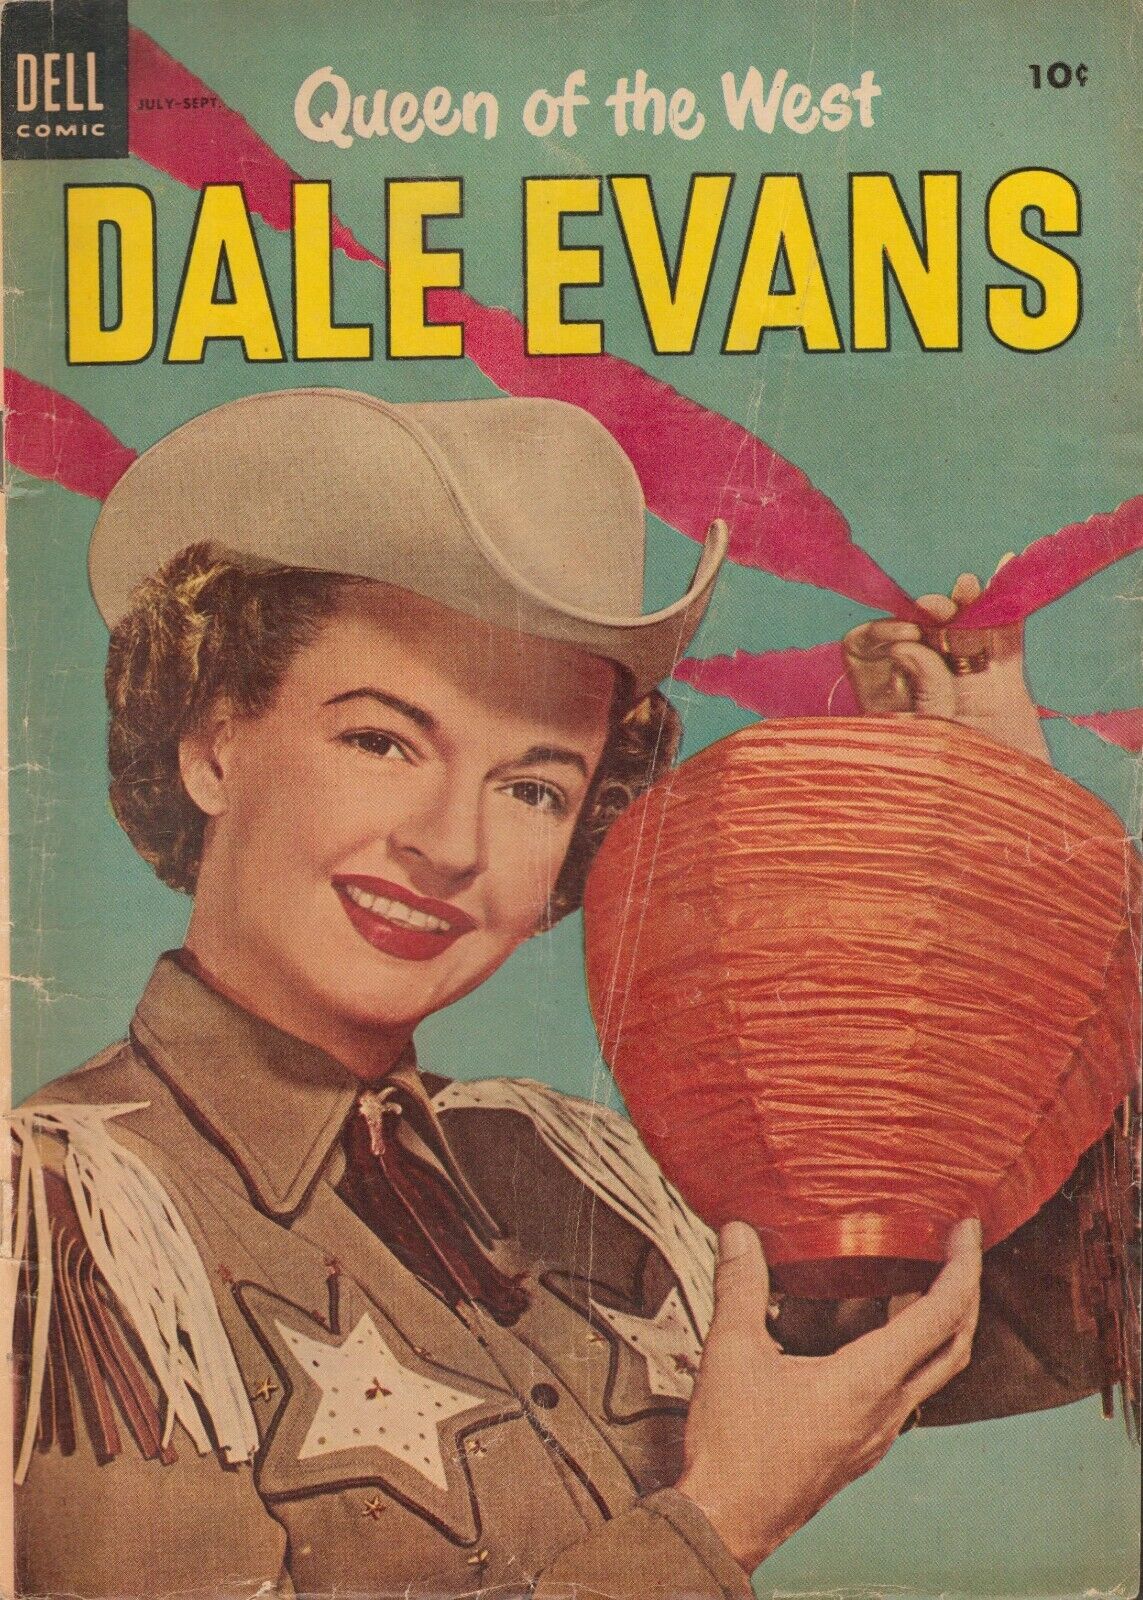 47882: Dell QUEEN OF THE WEST DALE EVANS #4 F- Grade